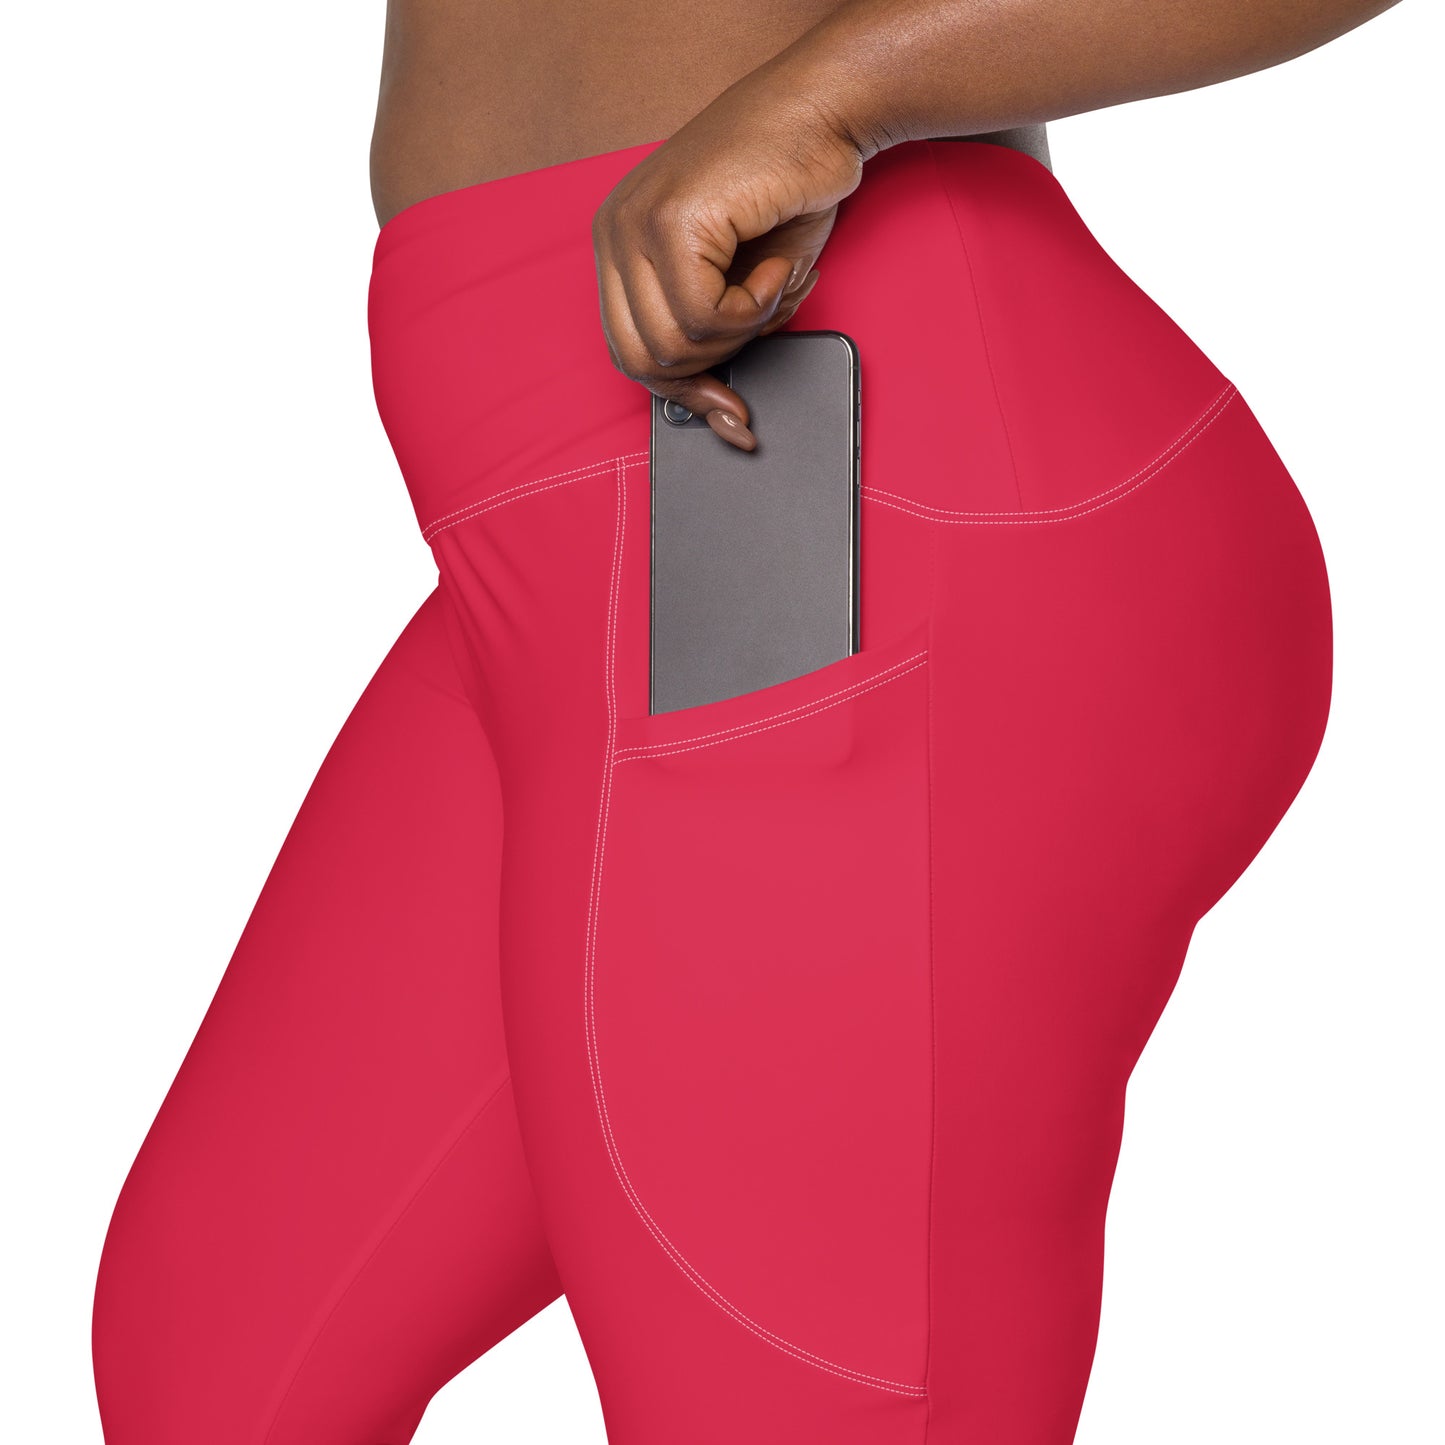 Milano Solid Red High Waist 7/8 Recycled Yoga Leggings / Yoga Pants with Pockets